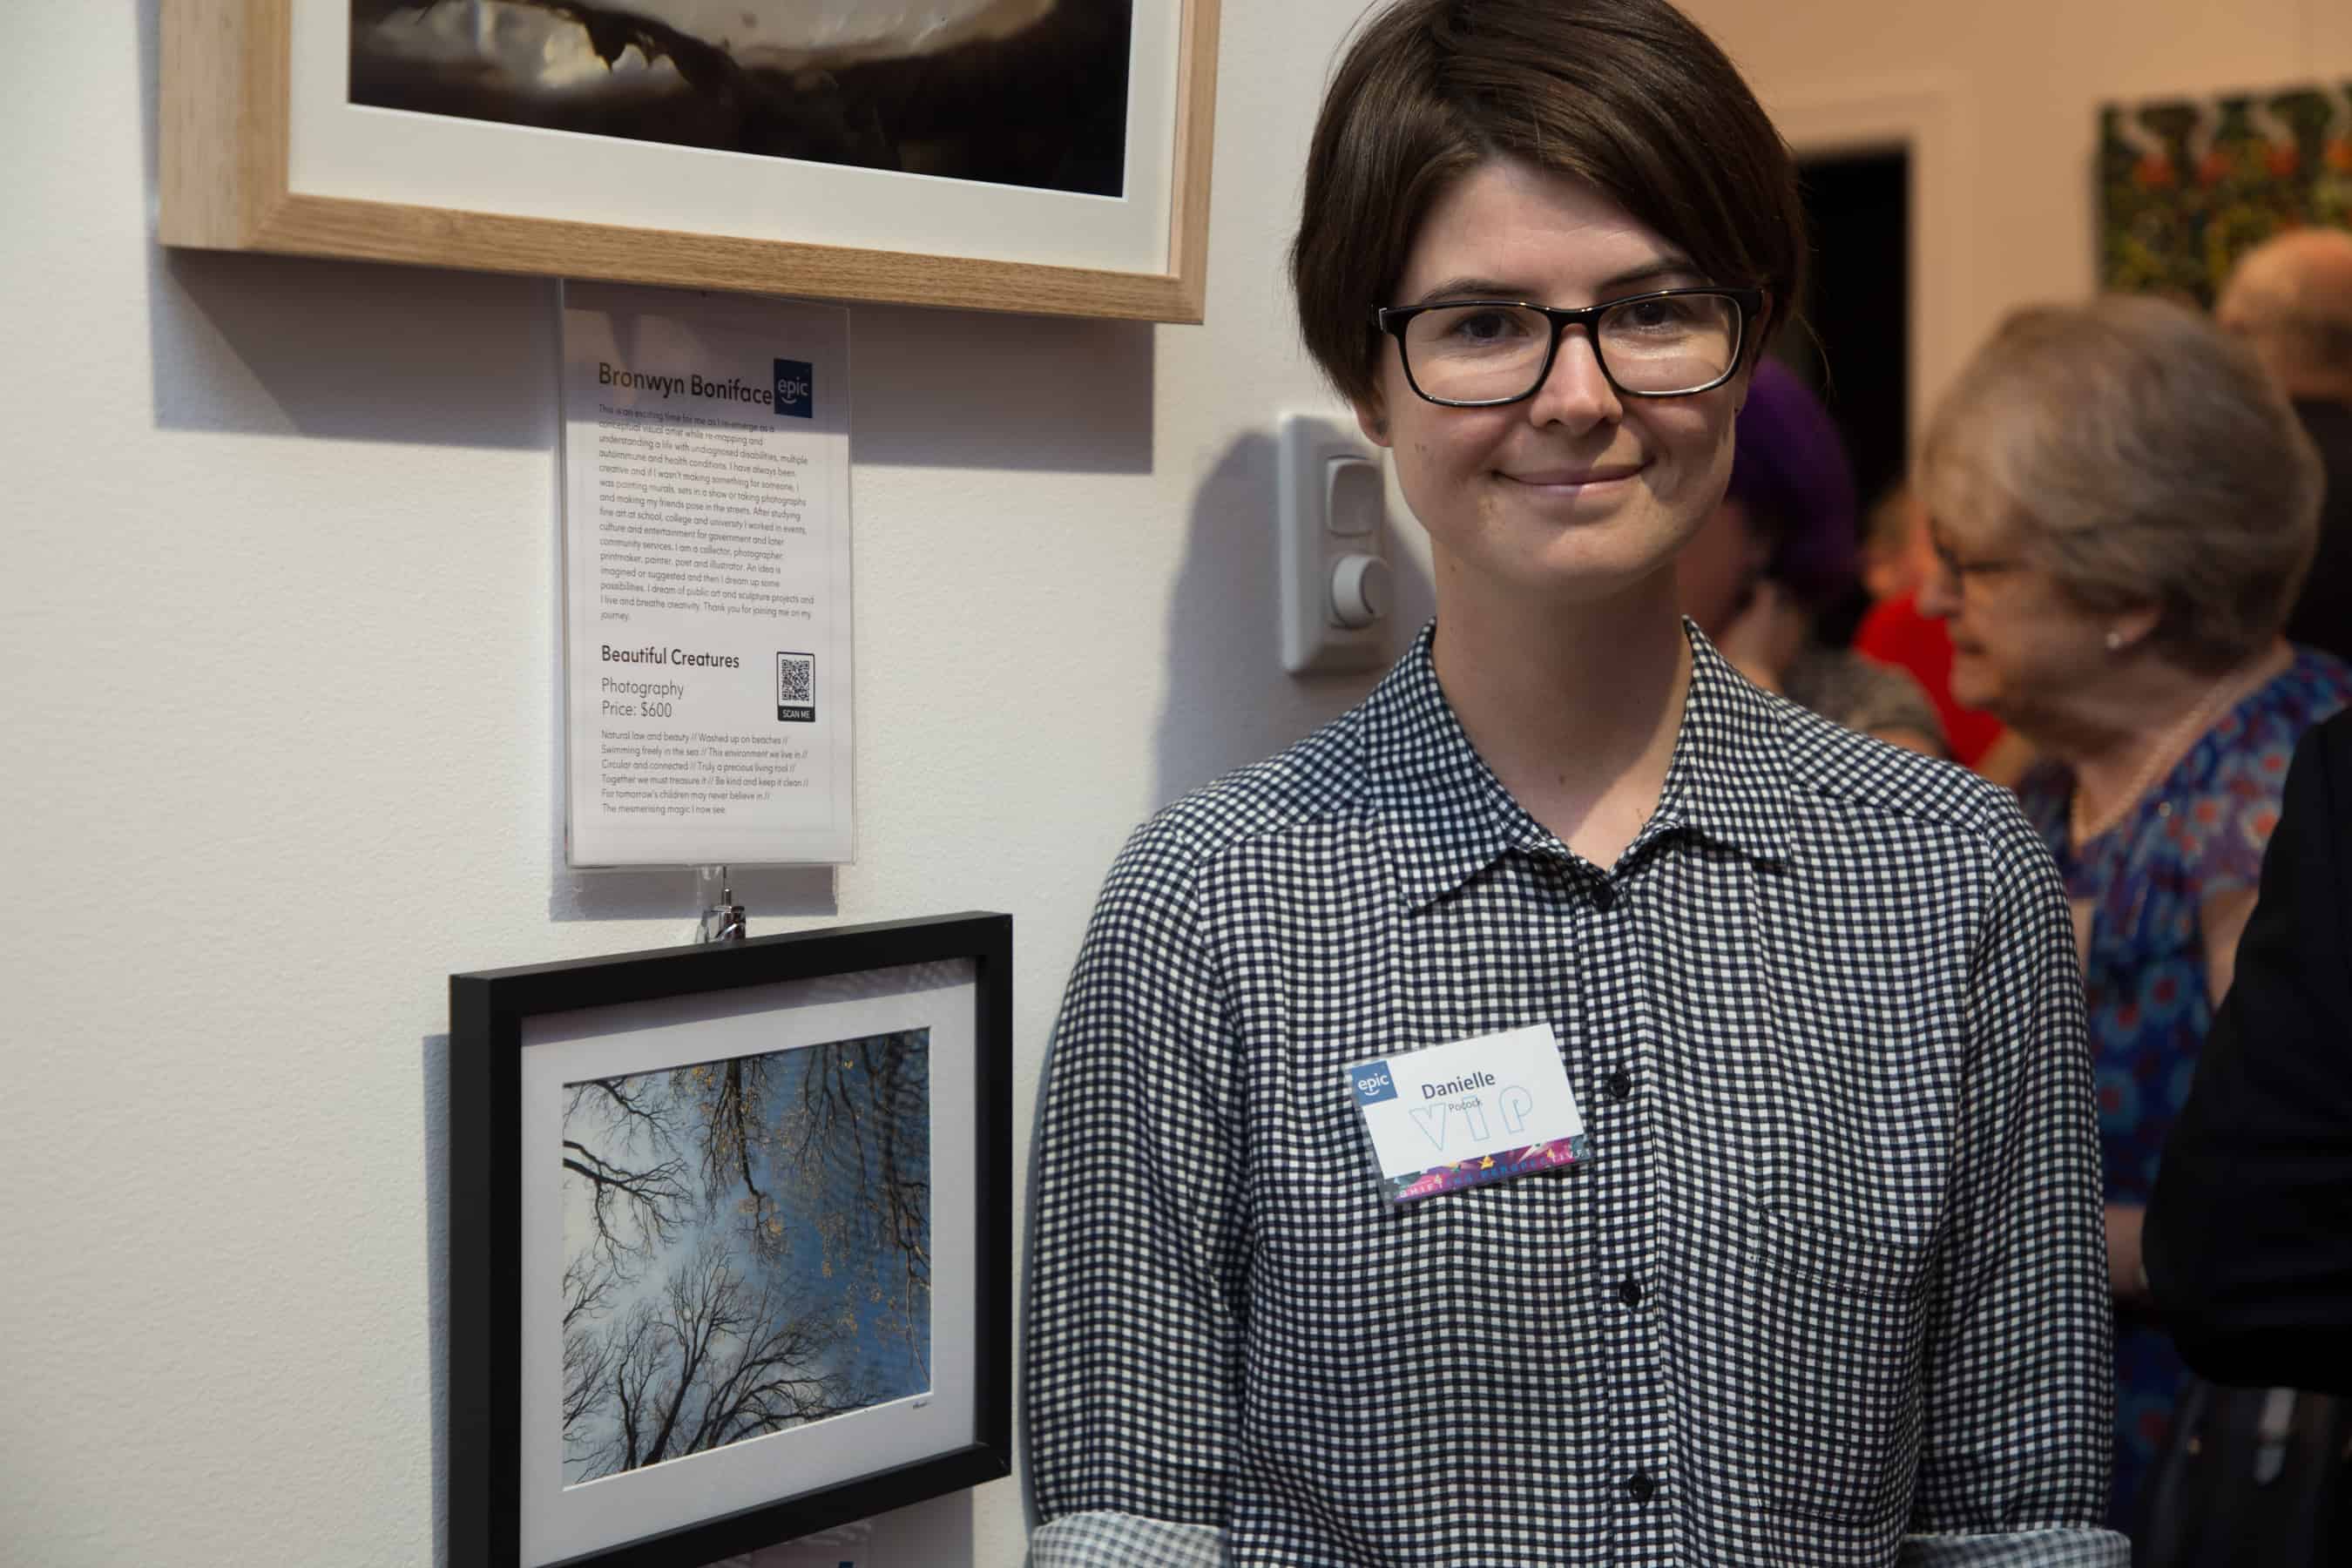 Artist Danielle stands next to her photograph